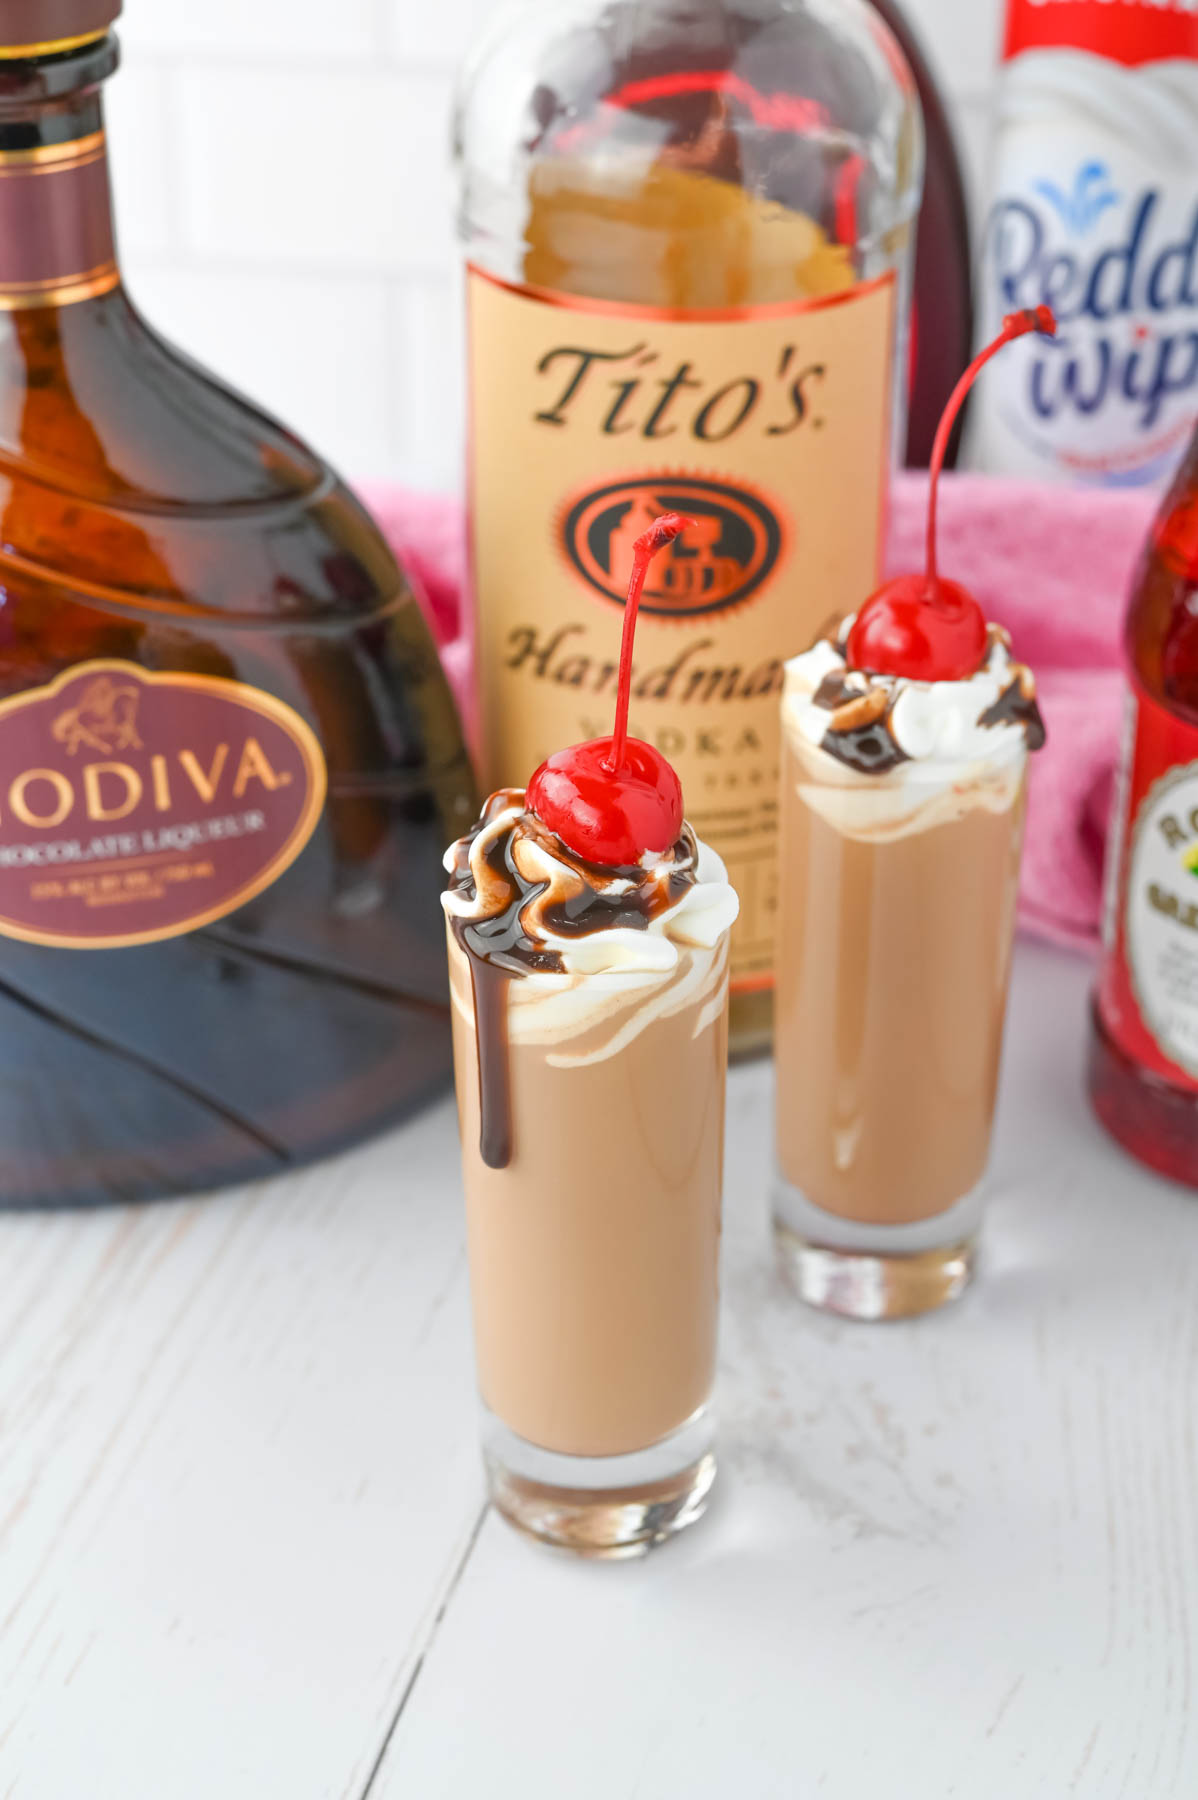 Two glasses with whipped cream and a bottle of tito's.